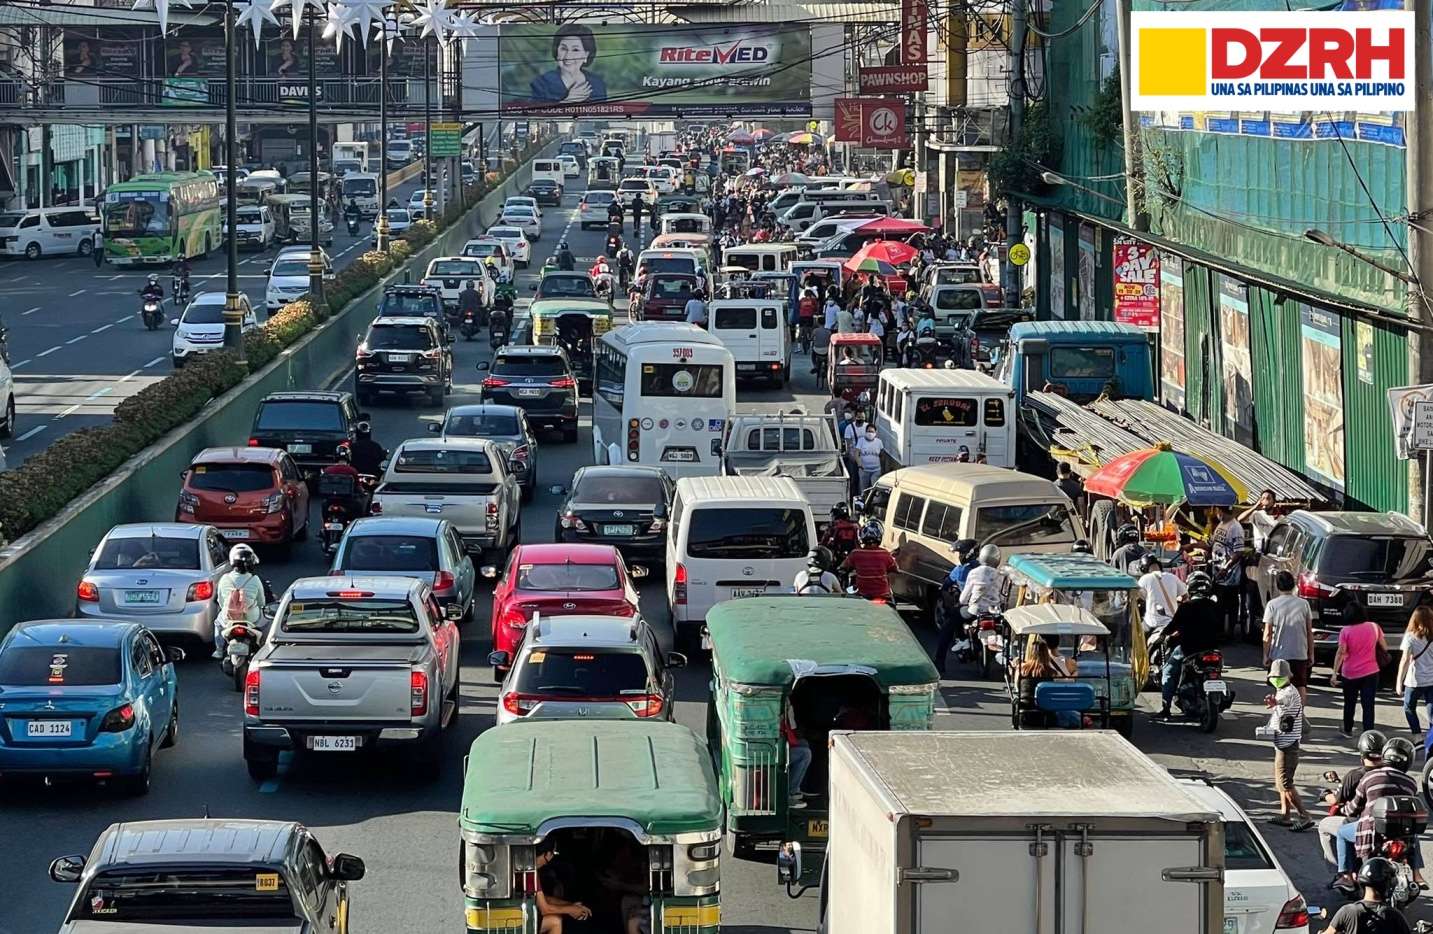 LTFRB: Unconsolidated PUV operators to be considered 'colorum' beginning February